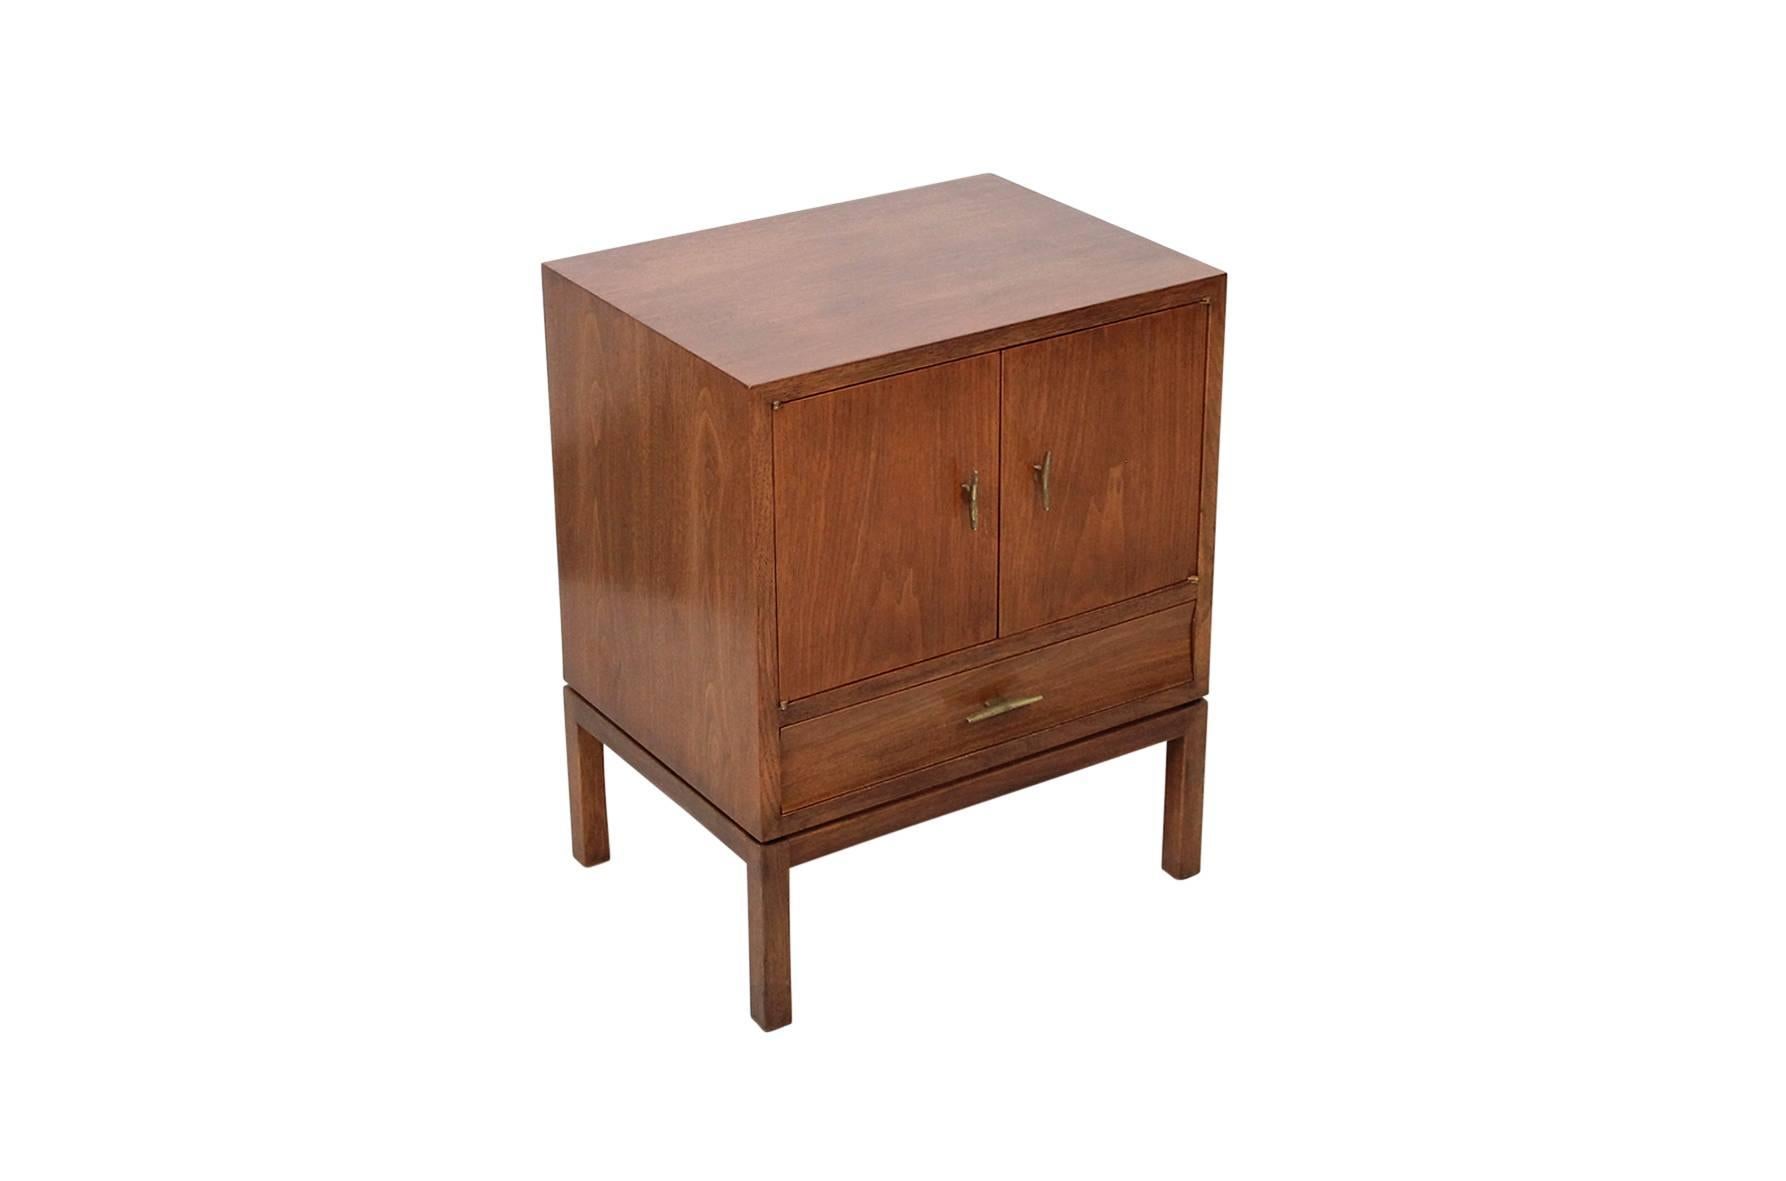 Mid-Century Modern Pair of Nightstands by Edward Wormley for Dunbar